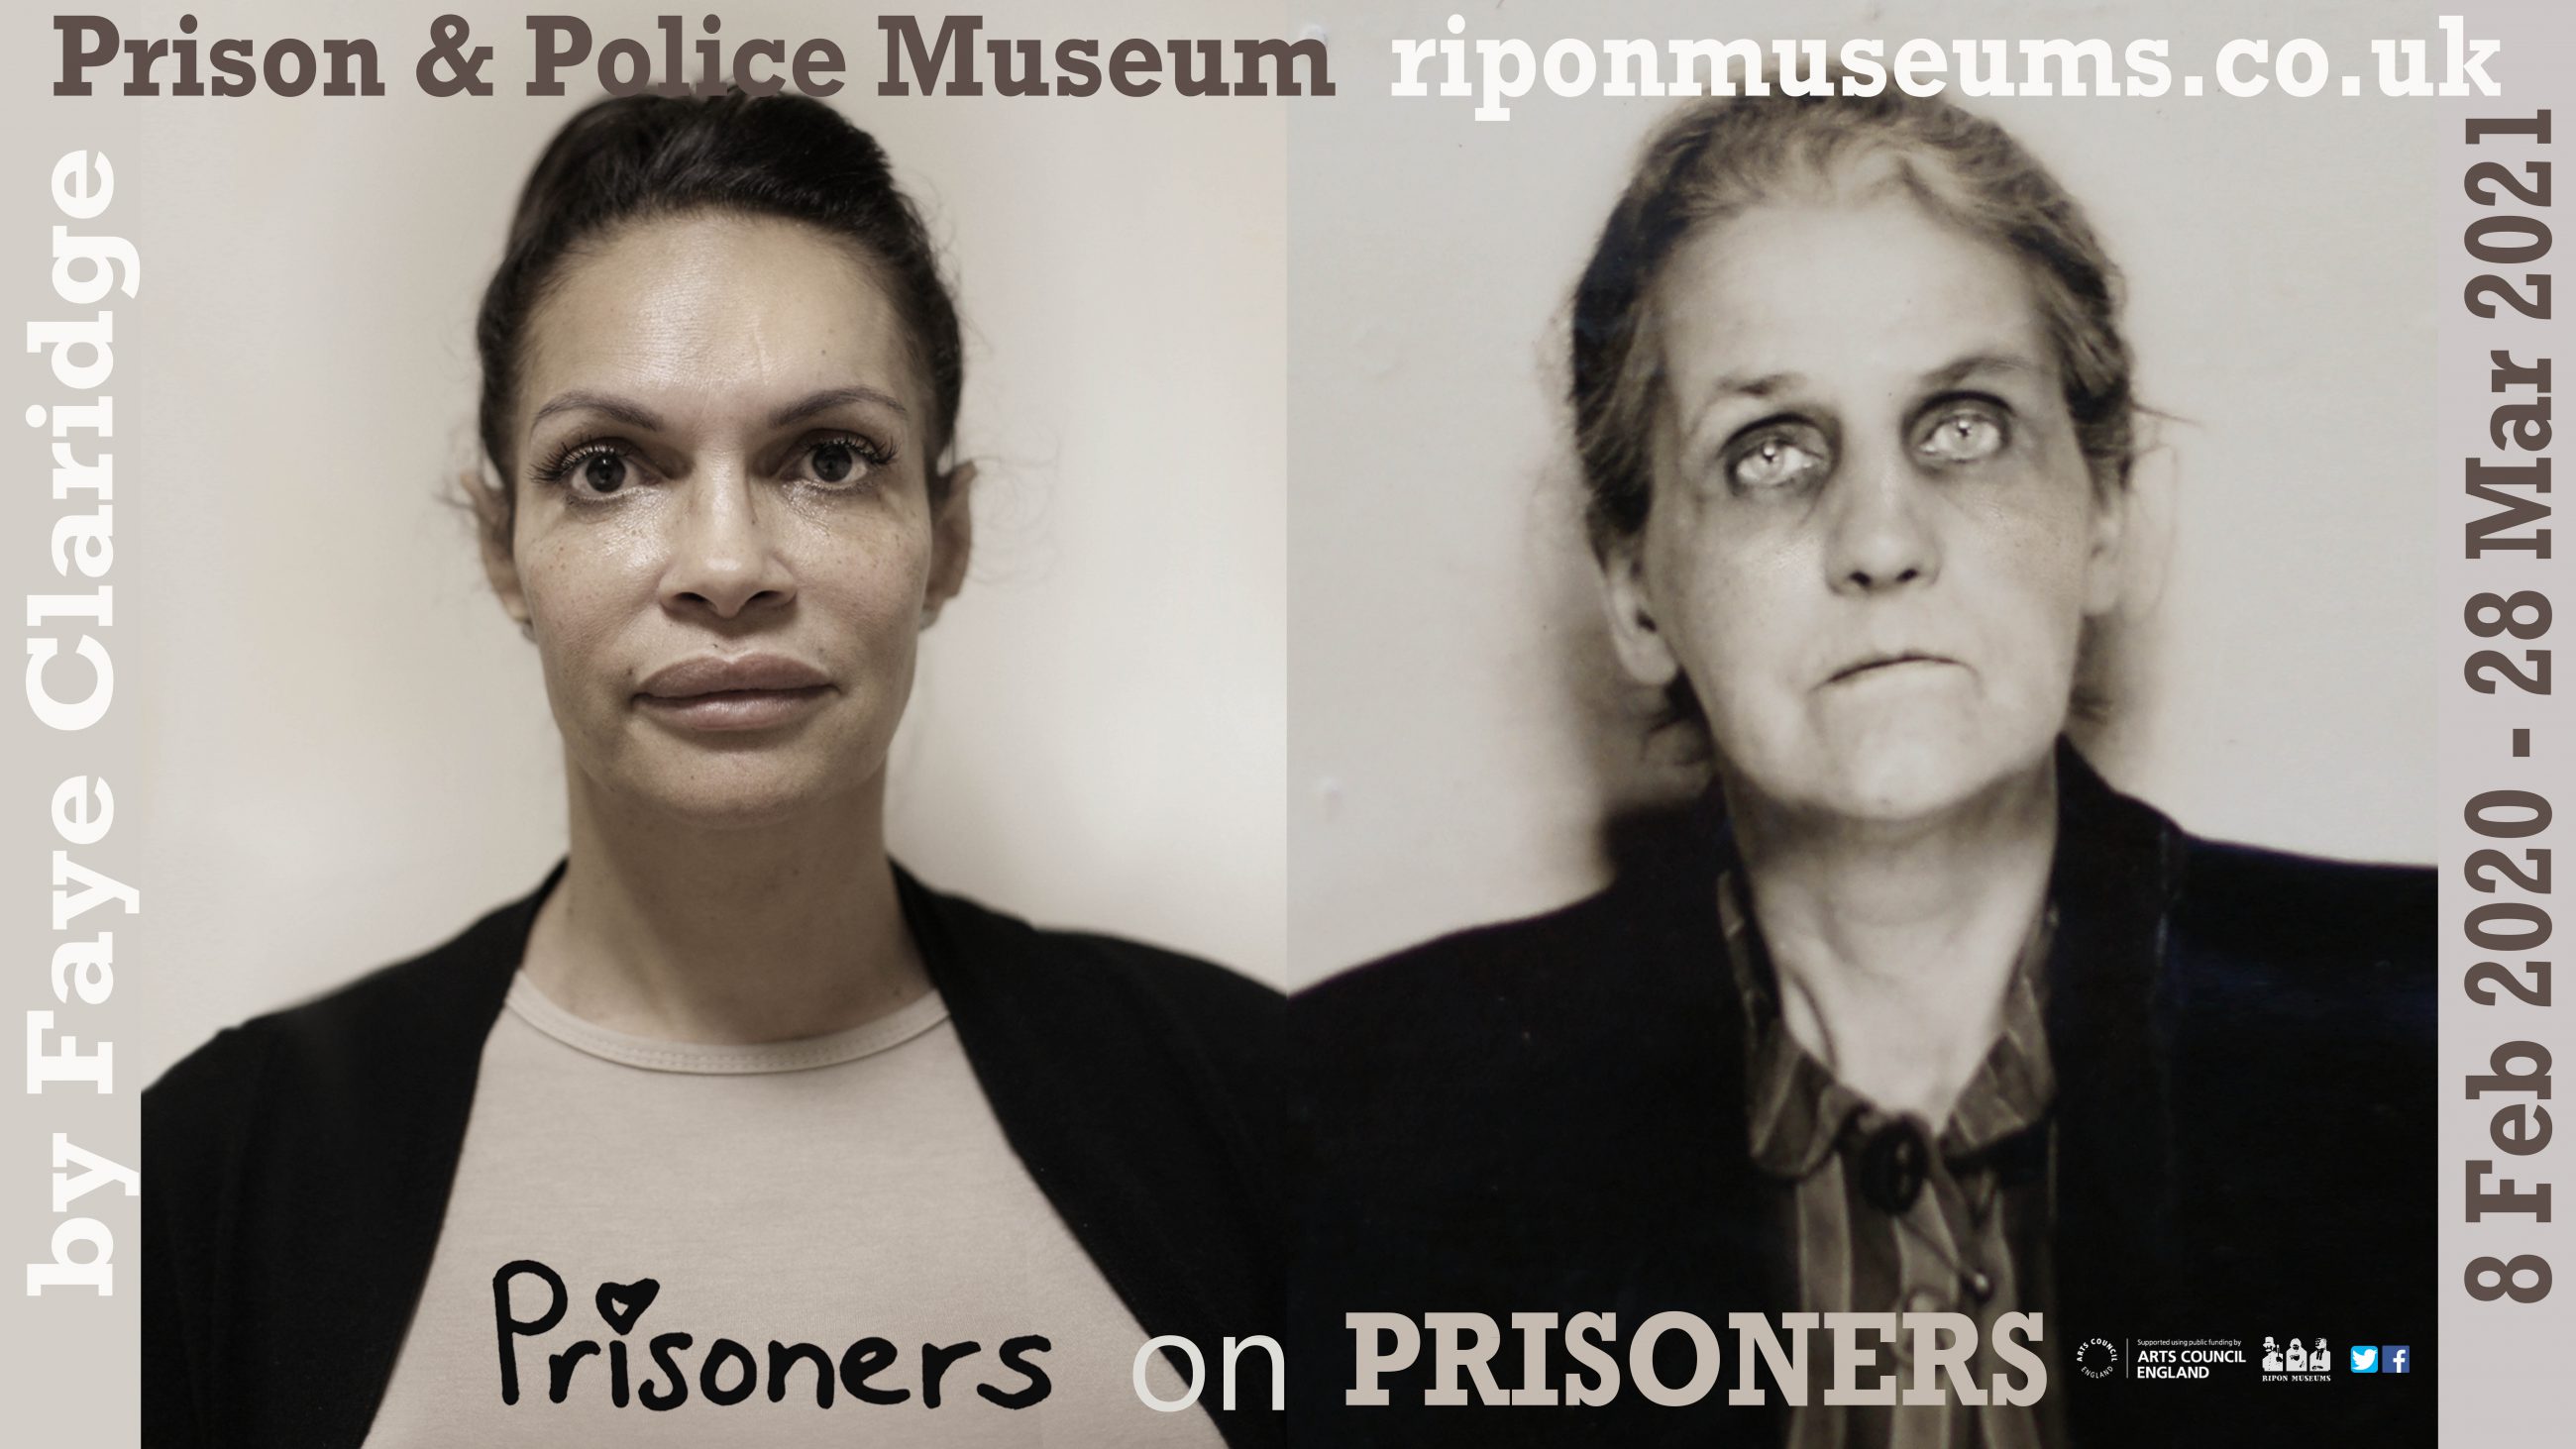 Two faces of female prisoners